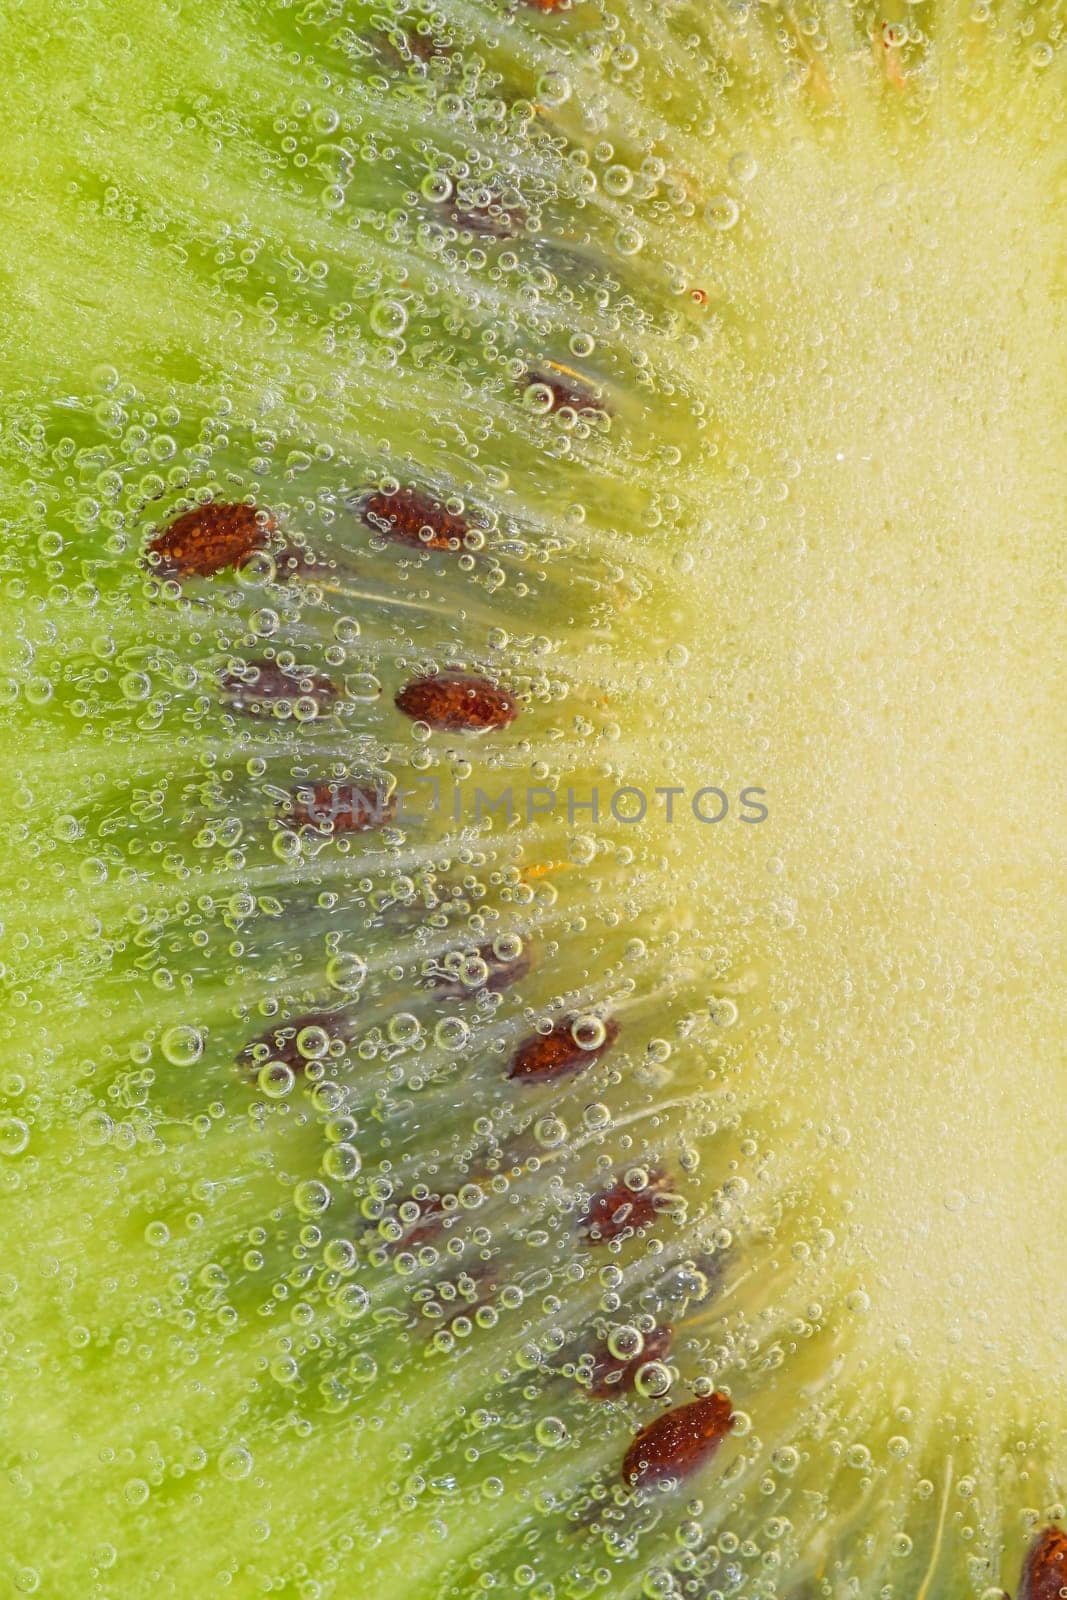 Close-up of a kiwi fruit slice in liquid with bubbles. Slice of ripe kiwi fruit in water. Close-up of fresh kiwi slice covered by bubbles. Macro vertical image